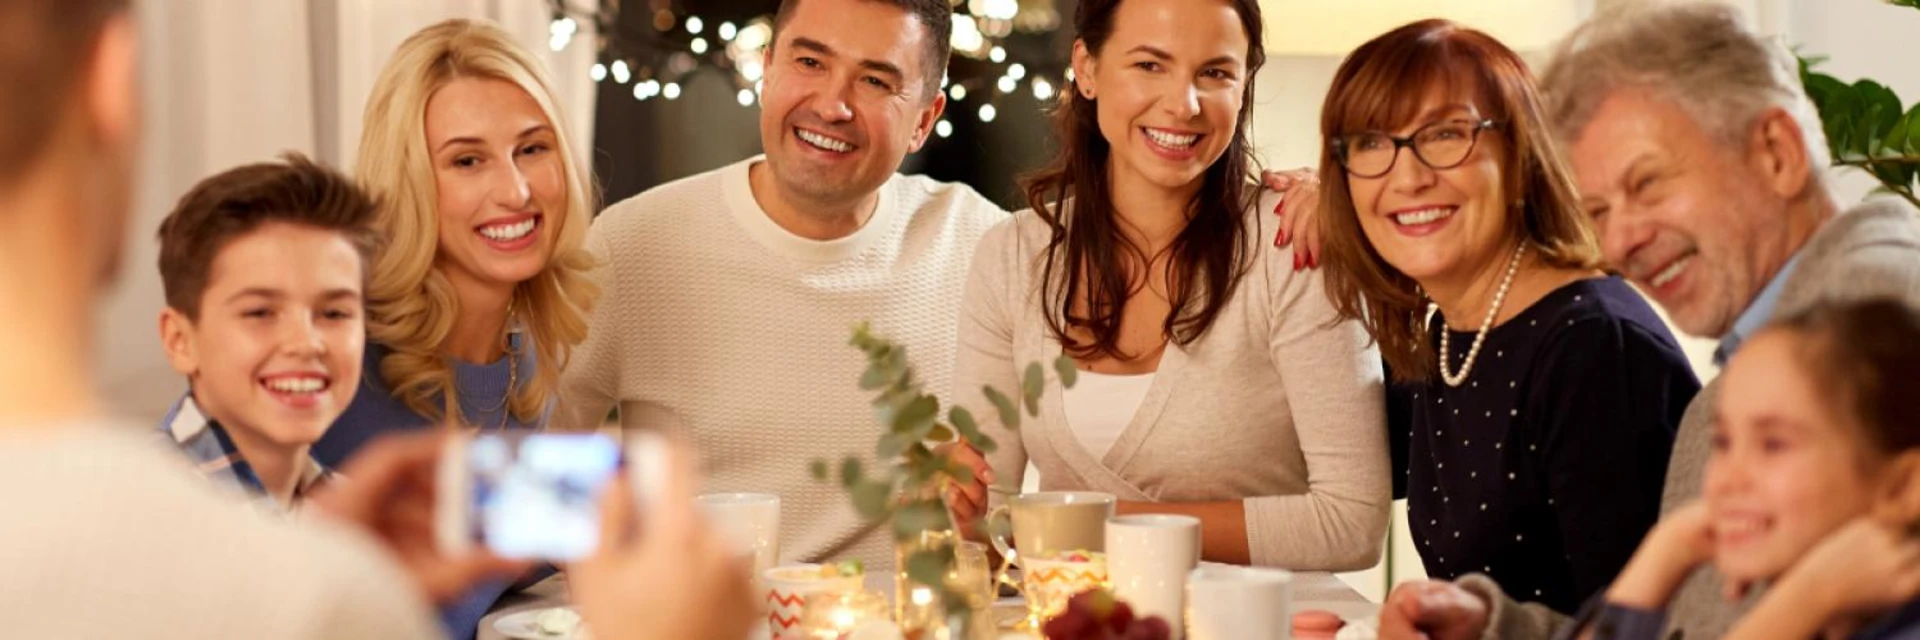 CELEBRATE THE HOLIDAYS AND FAMILY TOGETHERNESS WITH HELP FROM AAA